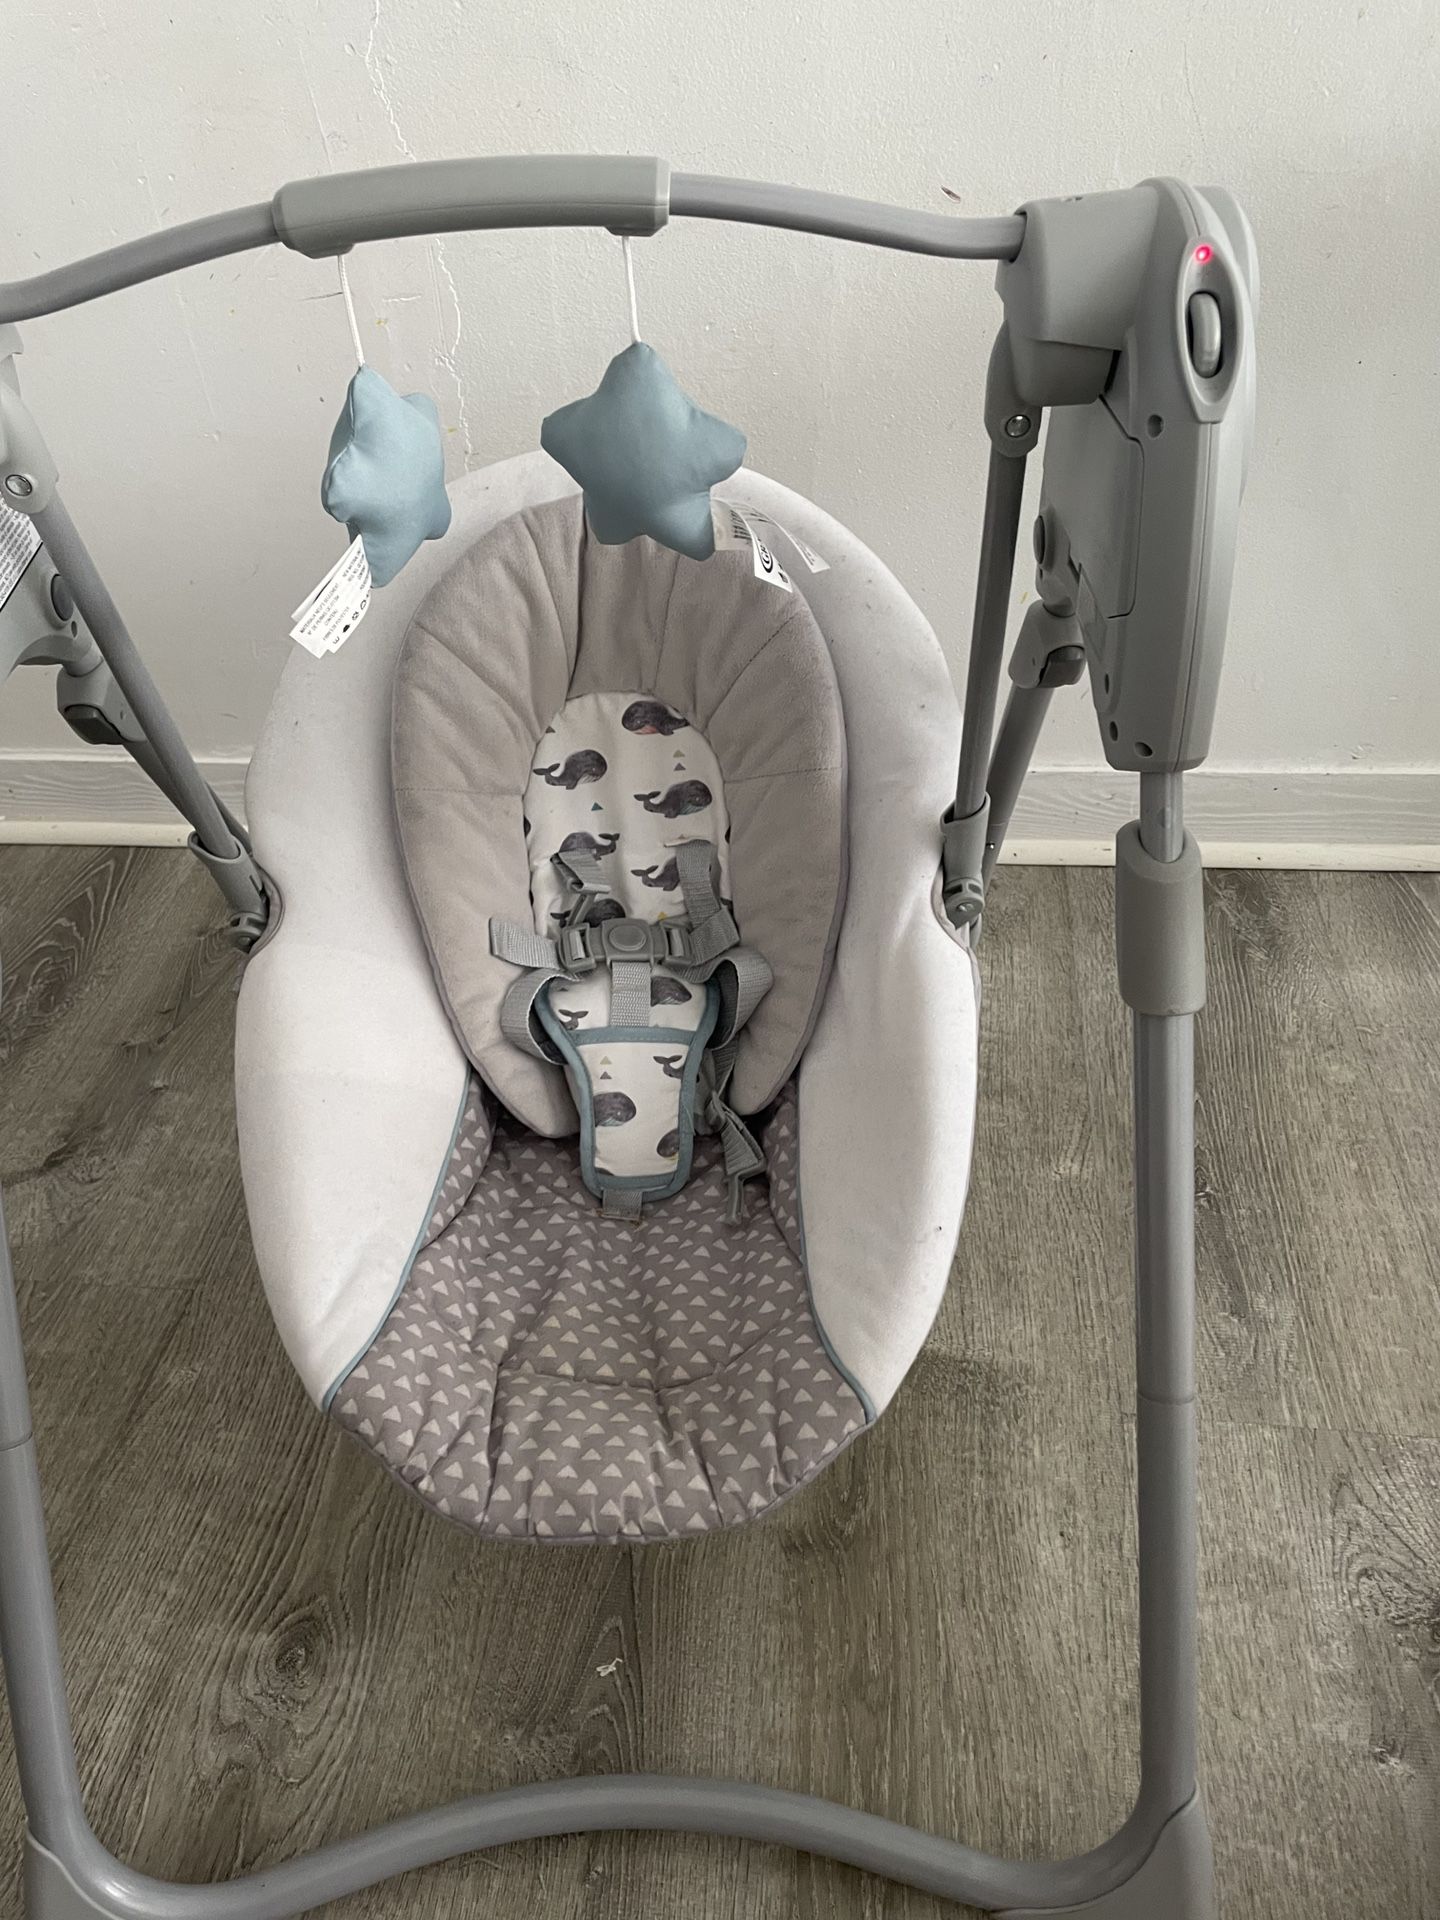 Graco Slim Spaces Compact Baby Swing 